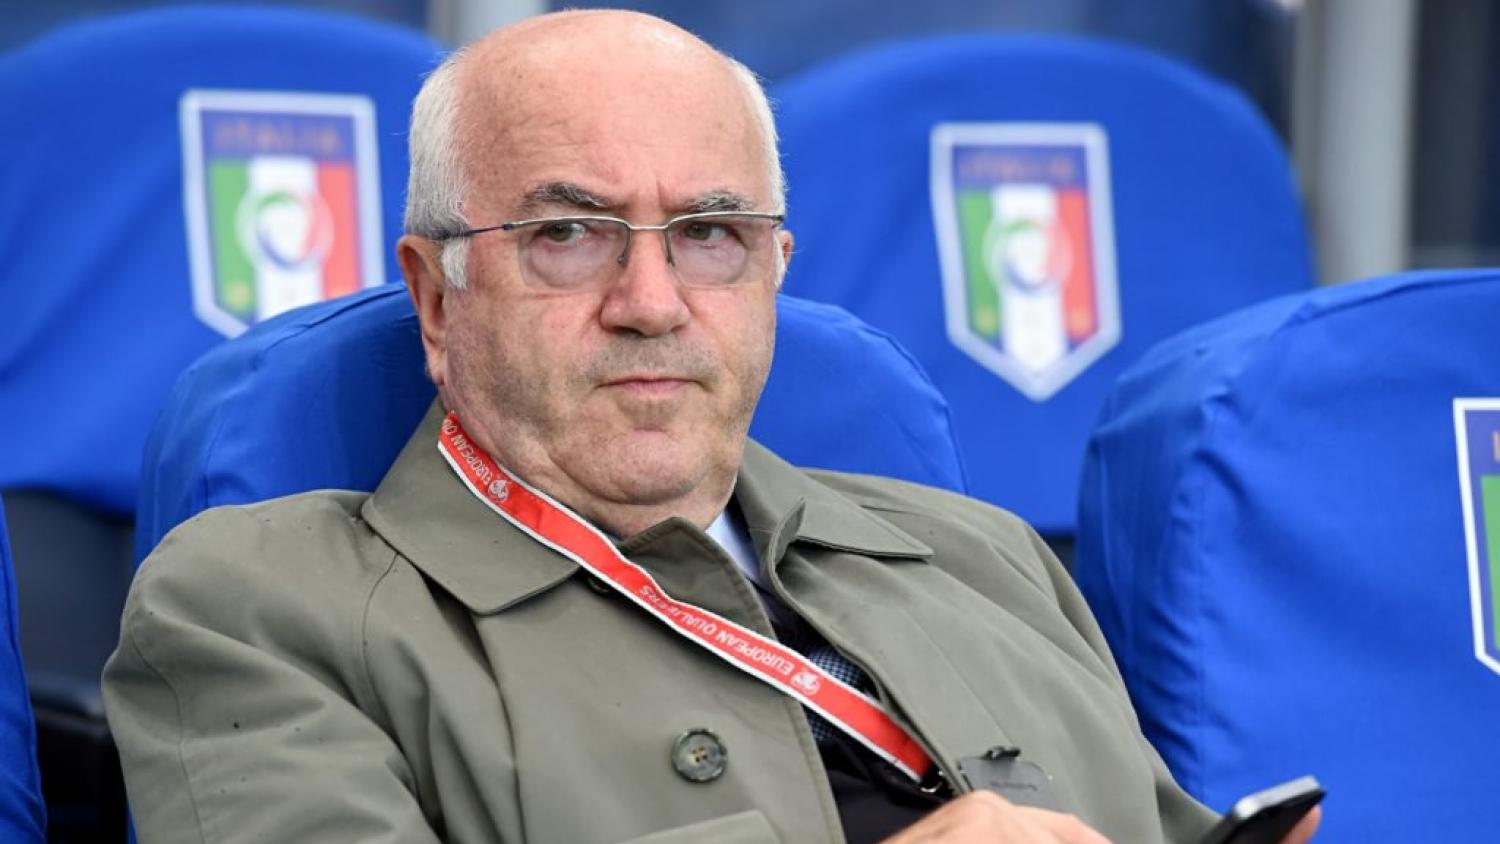 Italy's FA President Wants Stadiums To Have Lap Dances